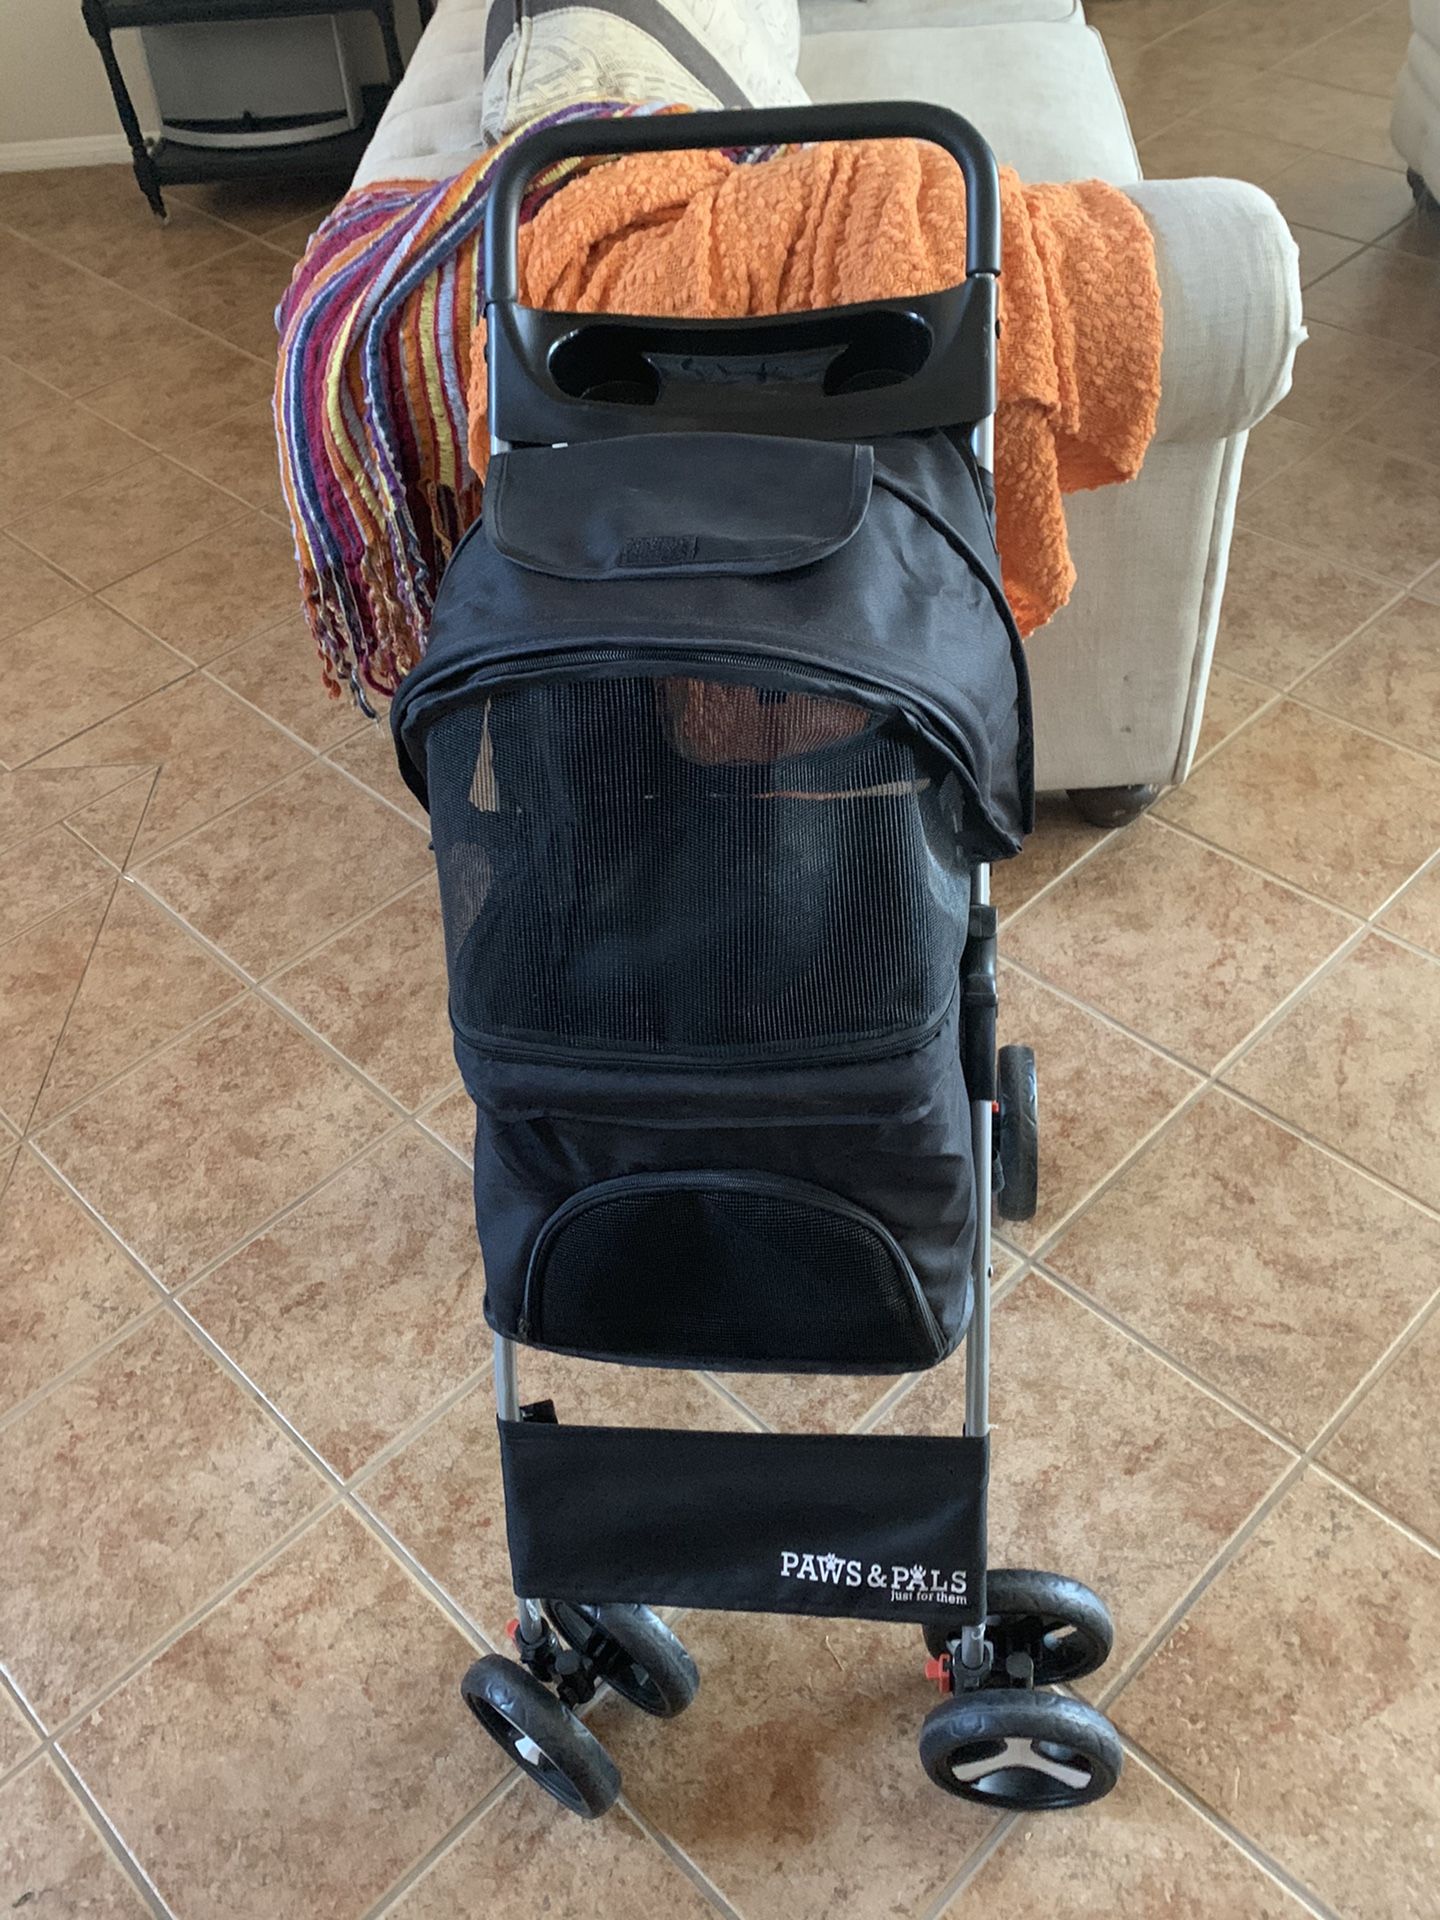 Paws & Pals Stroller